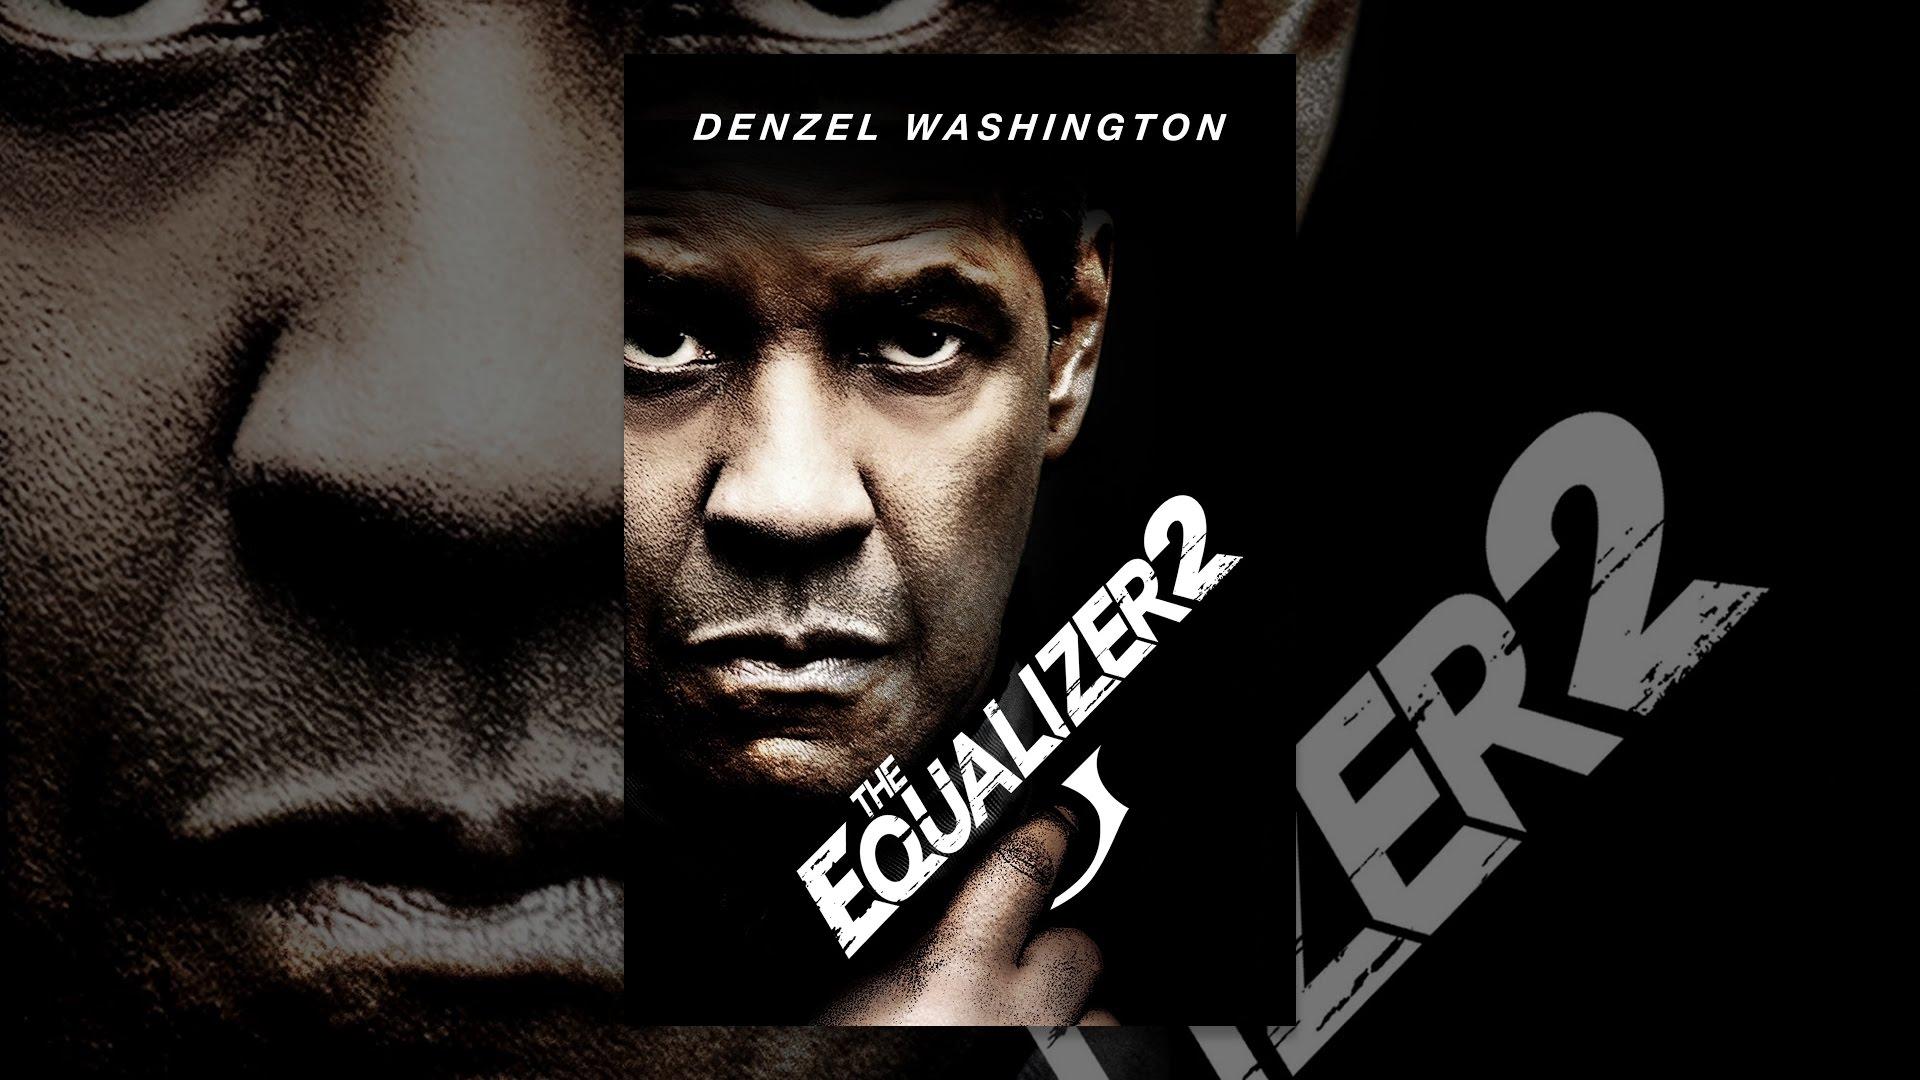 Reviewed: Denzel is back with a Vengeance in The Equalizer 2